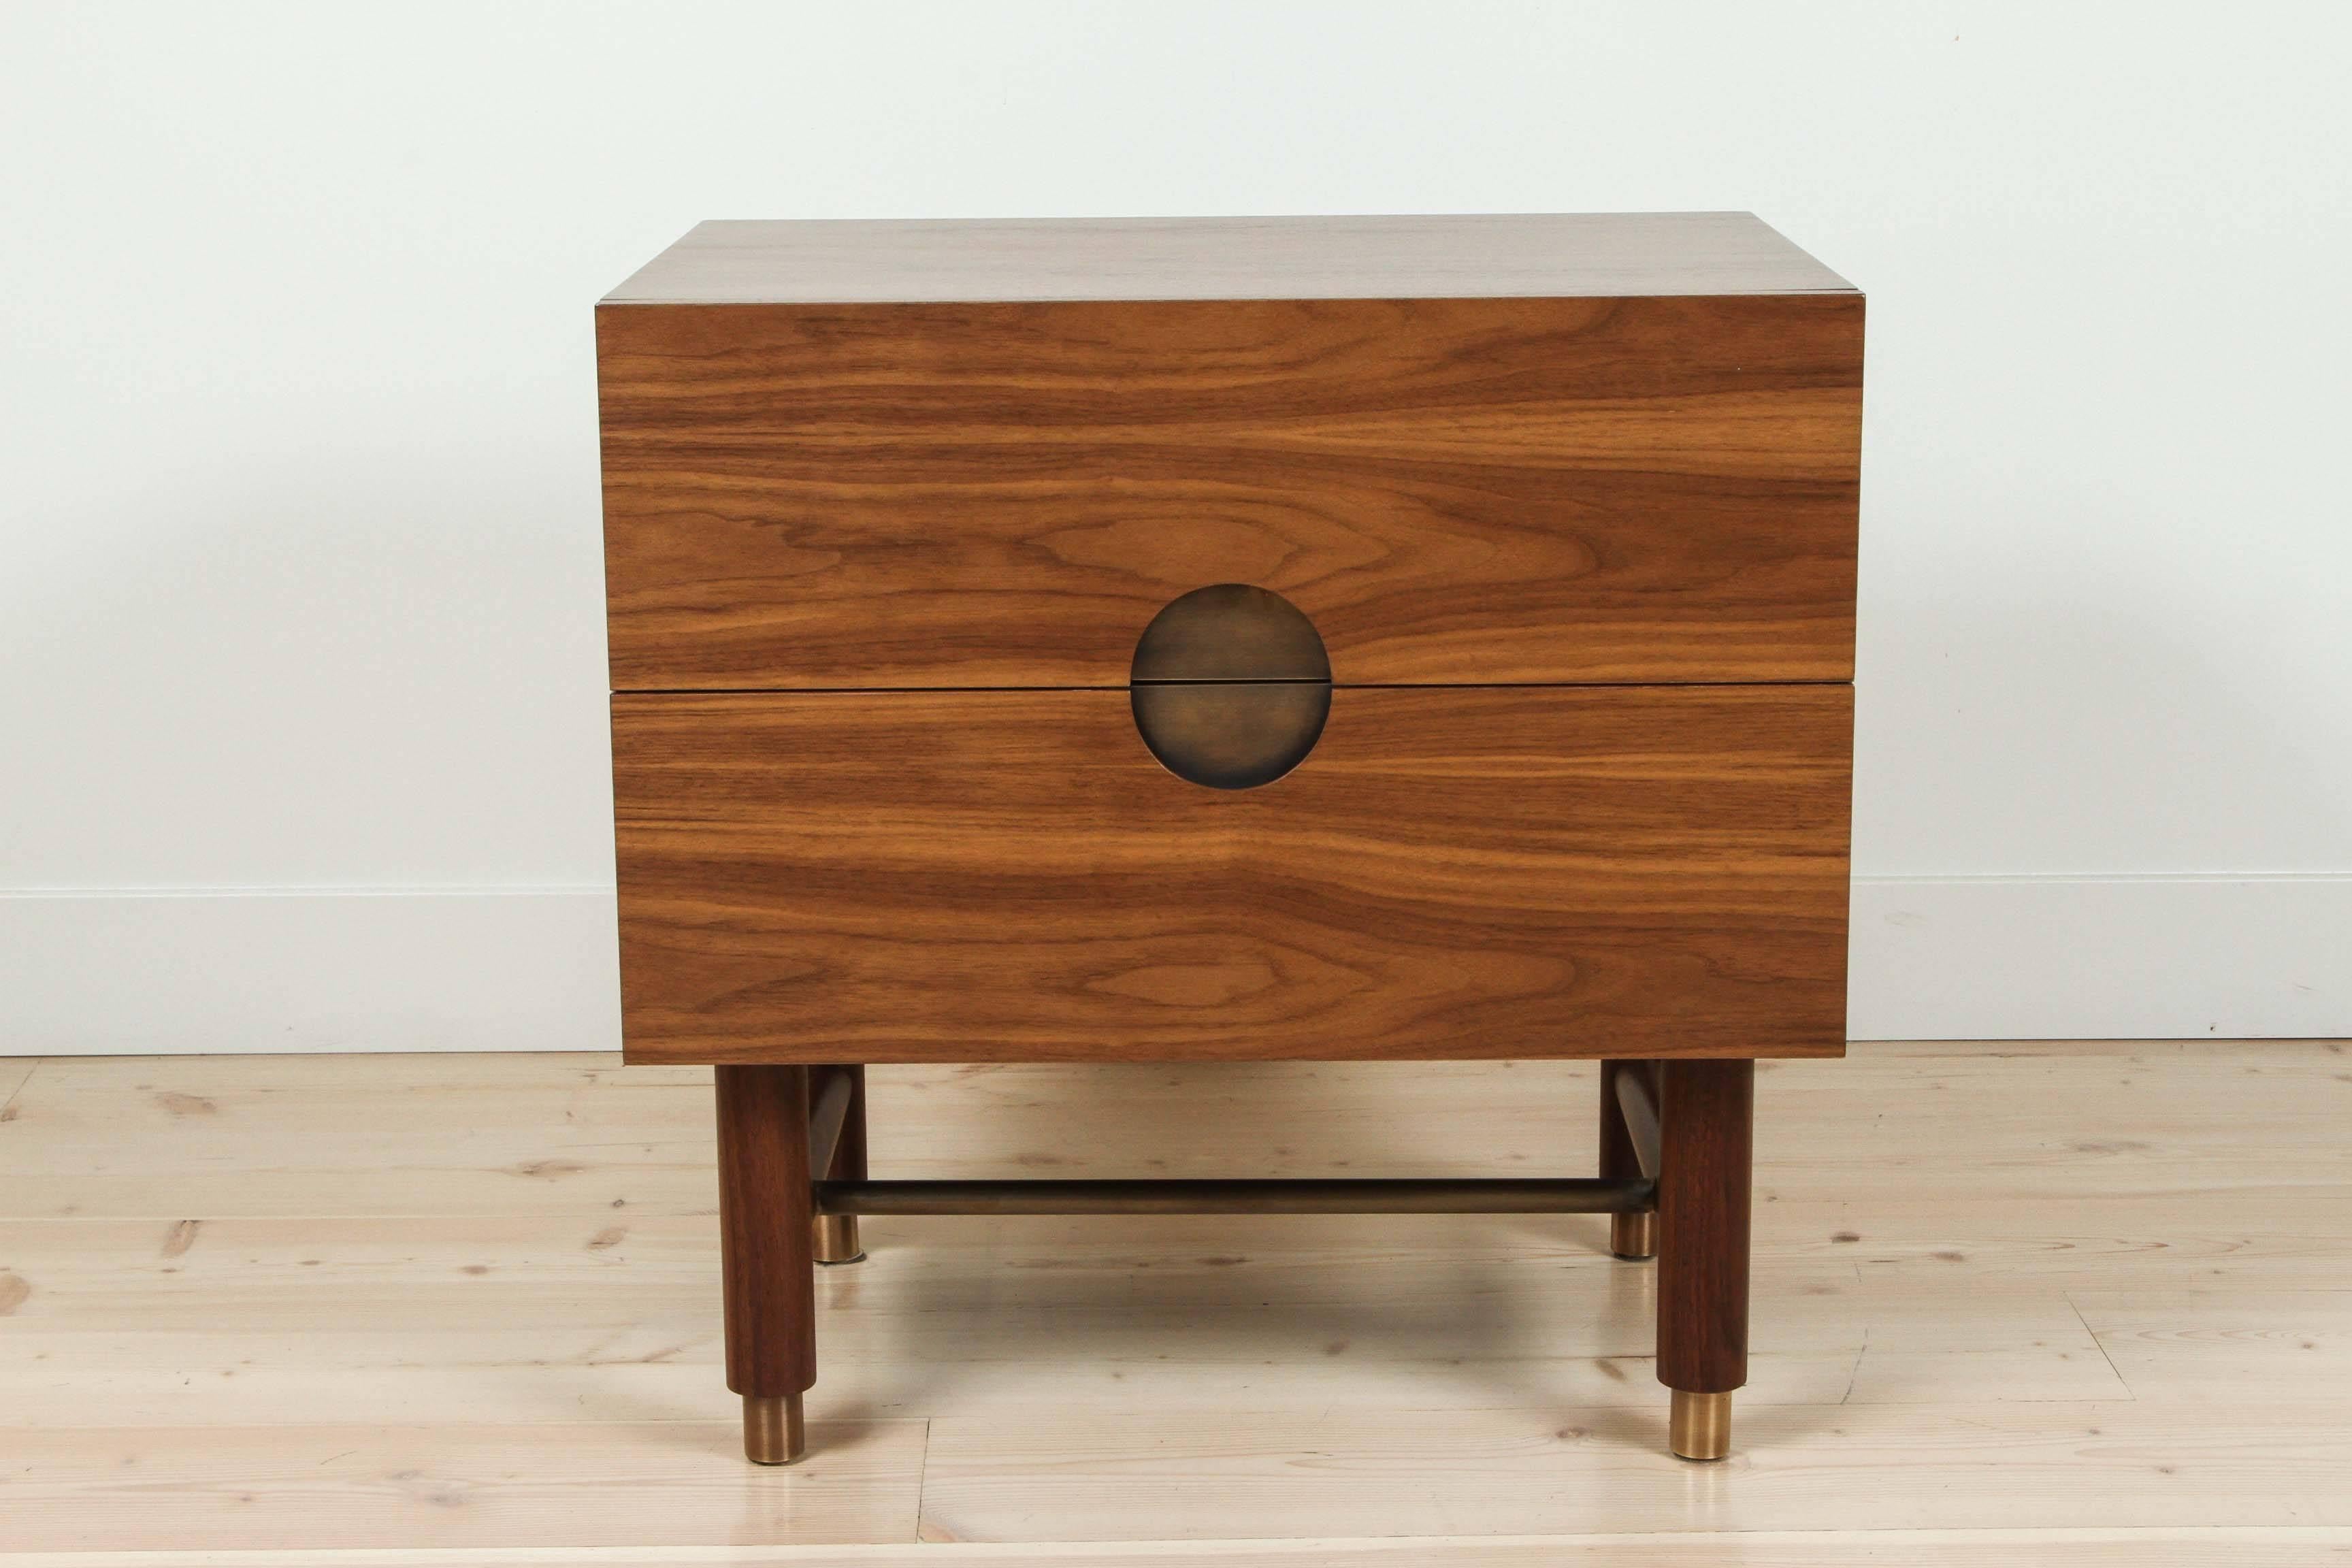 Niguel nightstand in walnut by Lawson-Fenning.

Available in various finishes with a 10-12 week lead time.